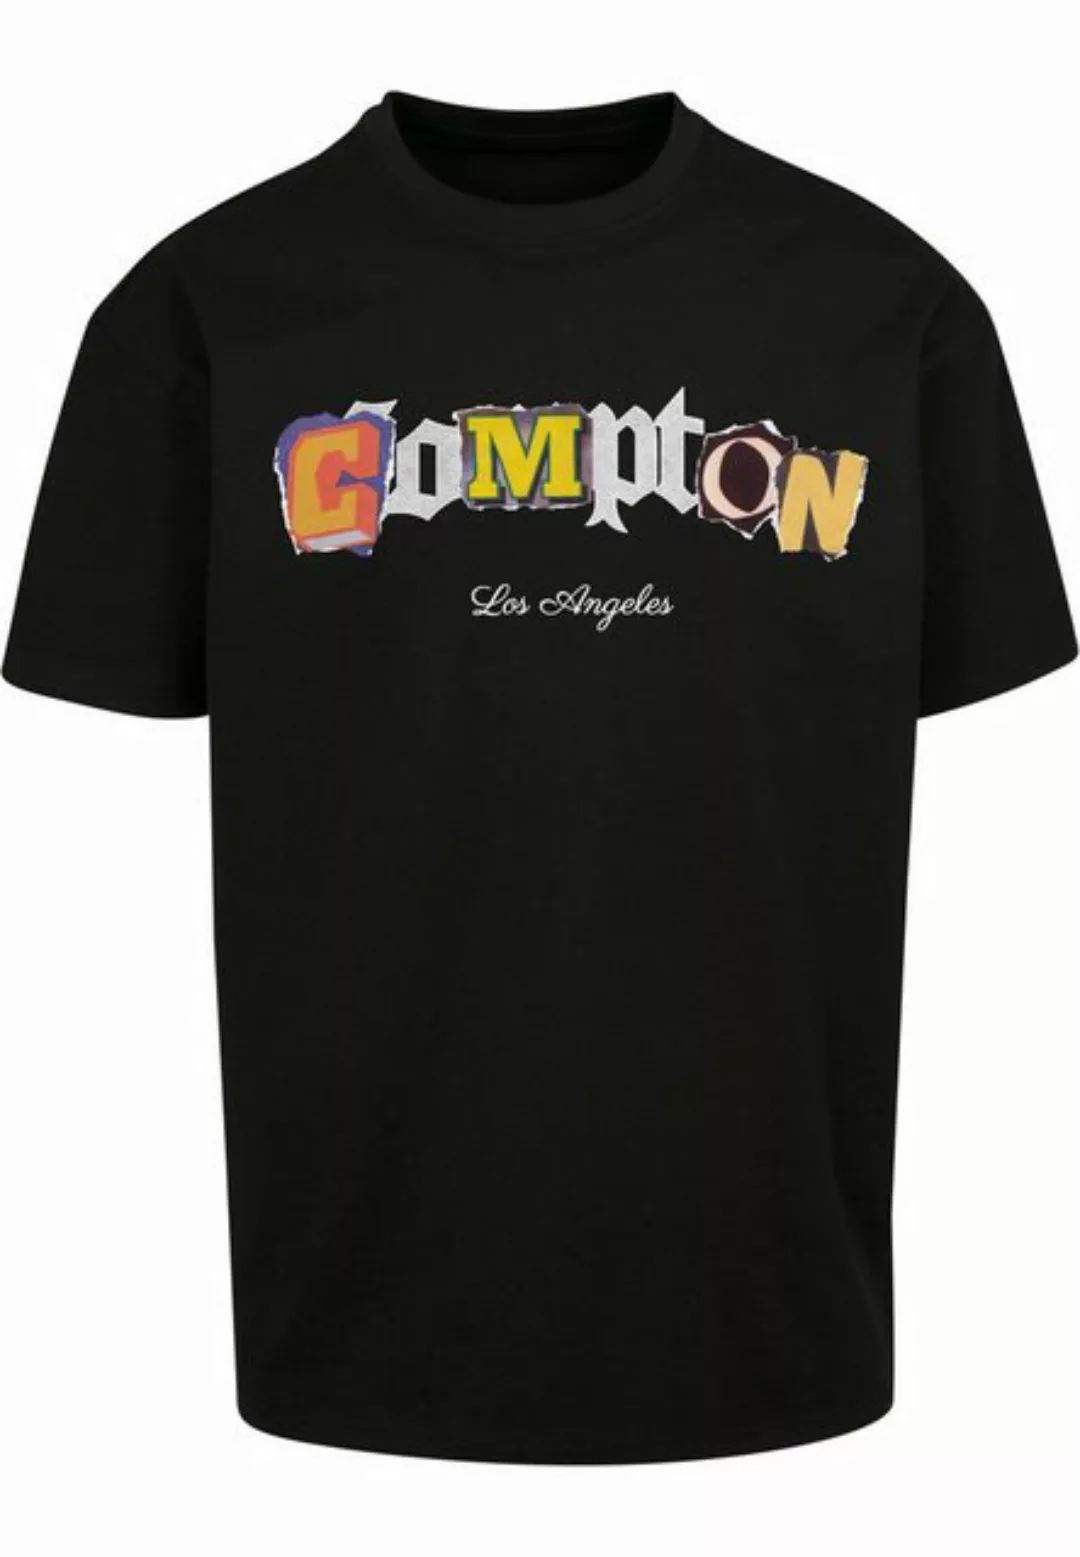 Upscale by Mister Tee T-Shirt Upscale by Mister Tee Unisex Compton L.A. Ove günstig online kaufen